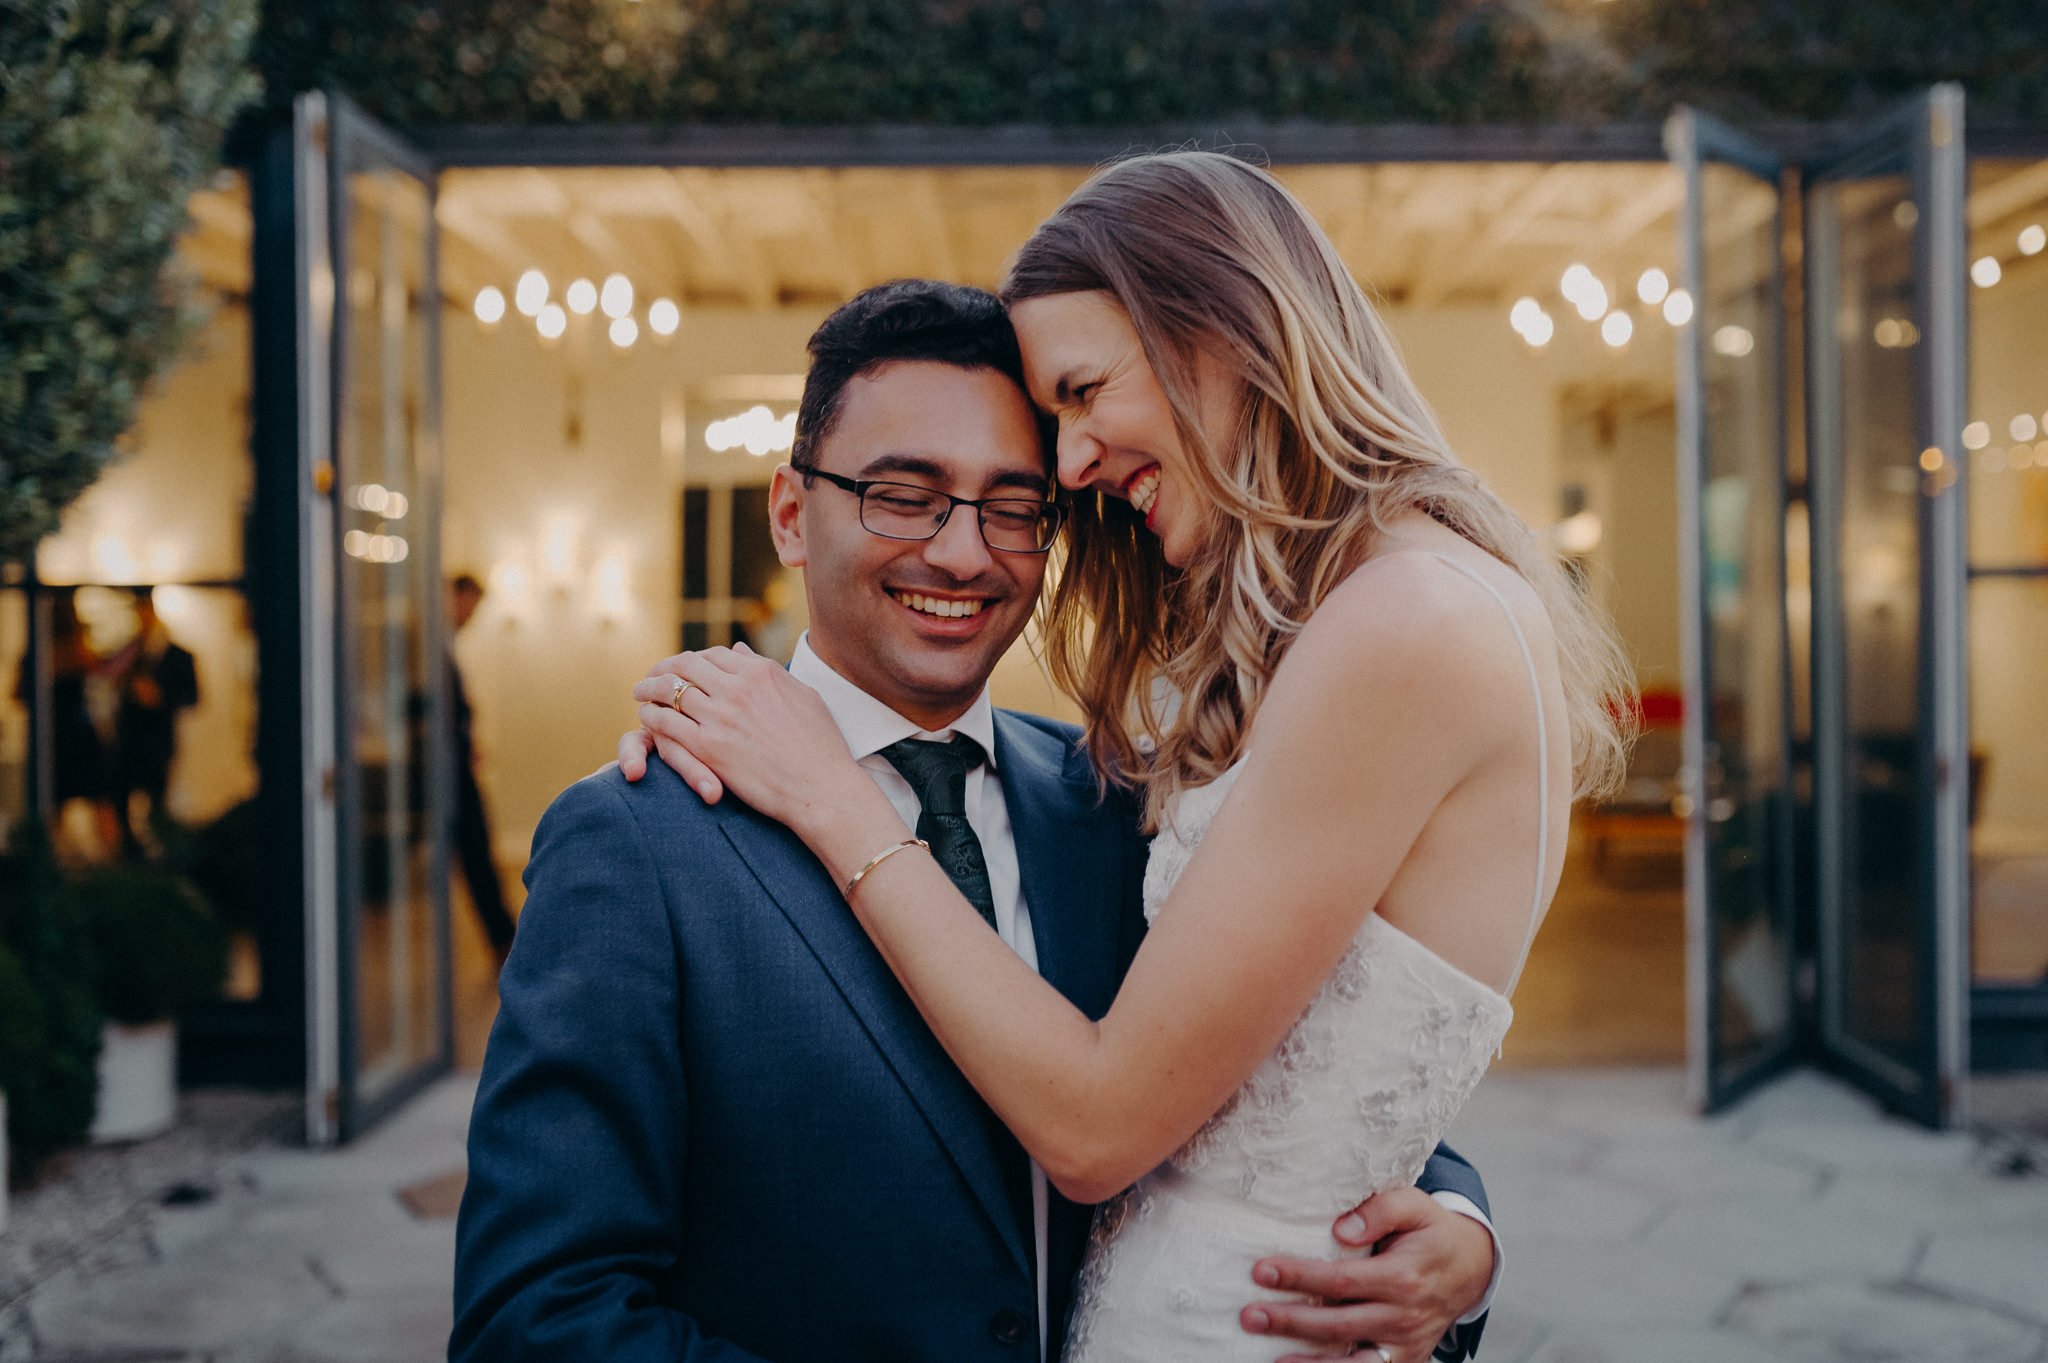 the fig house wedding - queer wedding photographers in los angeles - itlaphoto.com-101.jpg